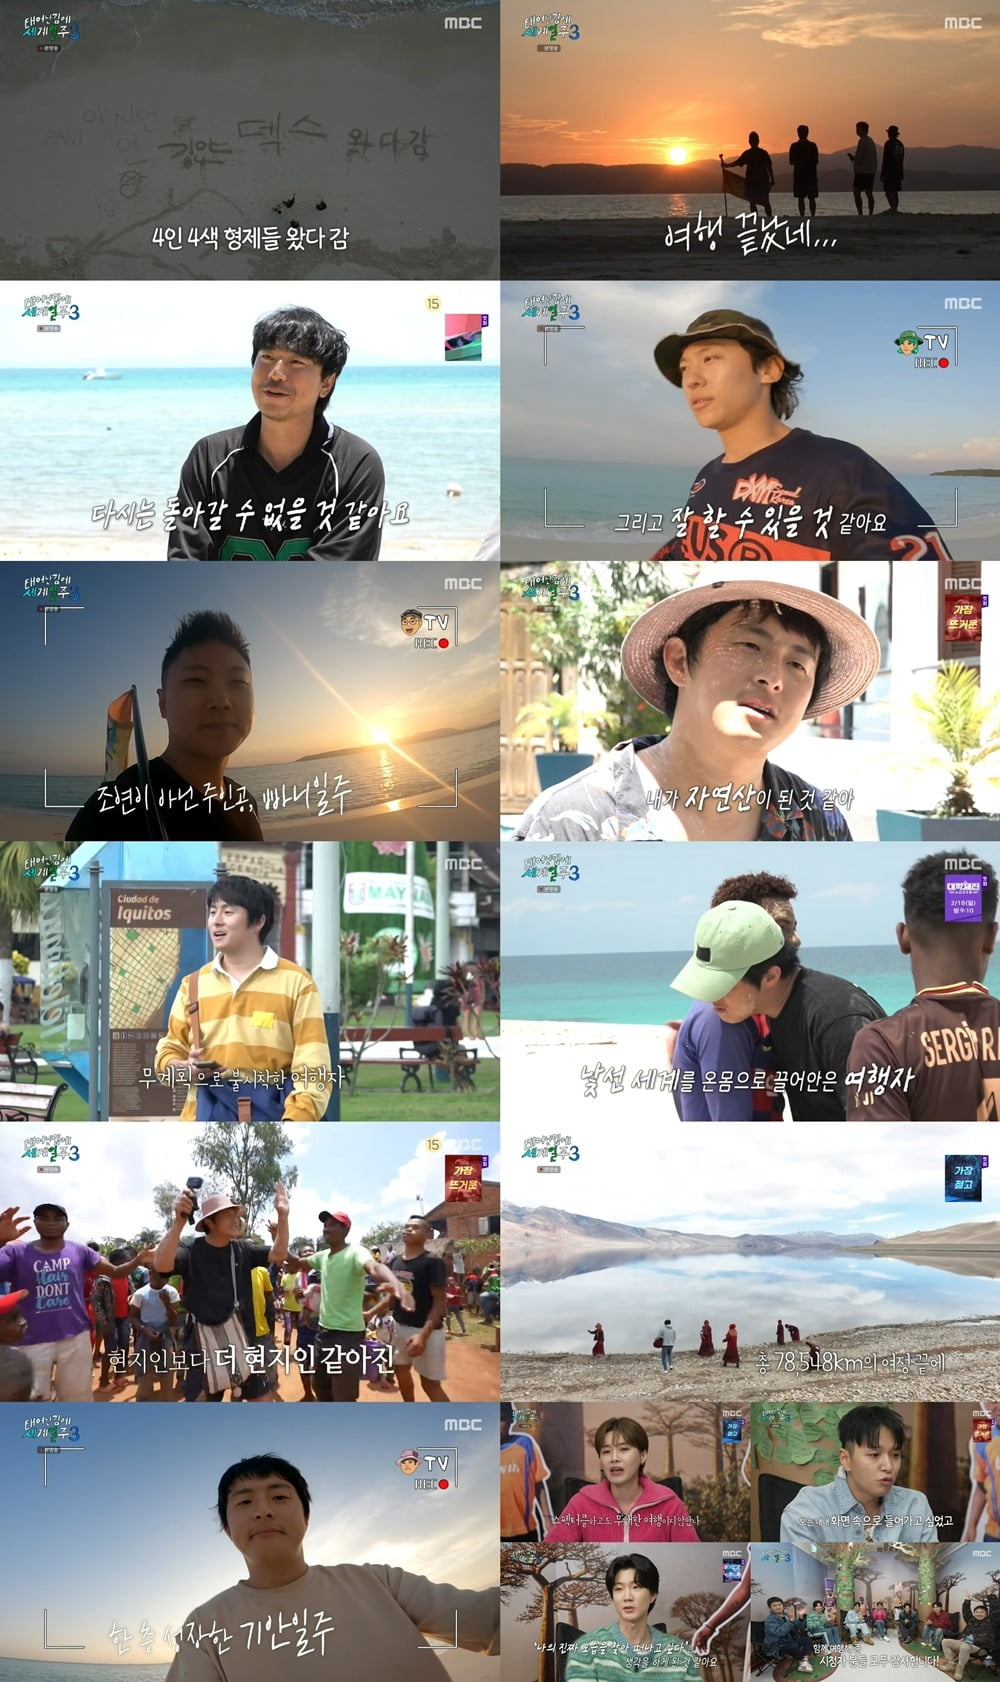 The final episode of 'Adventure By Accident 3' recorded the highest rating of 7.9% per minute.